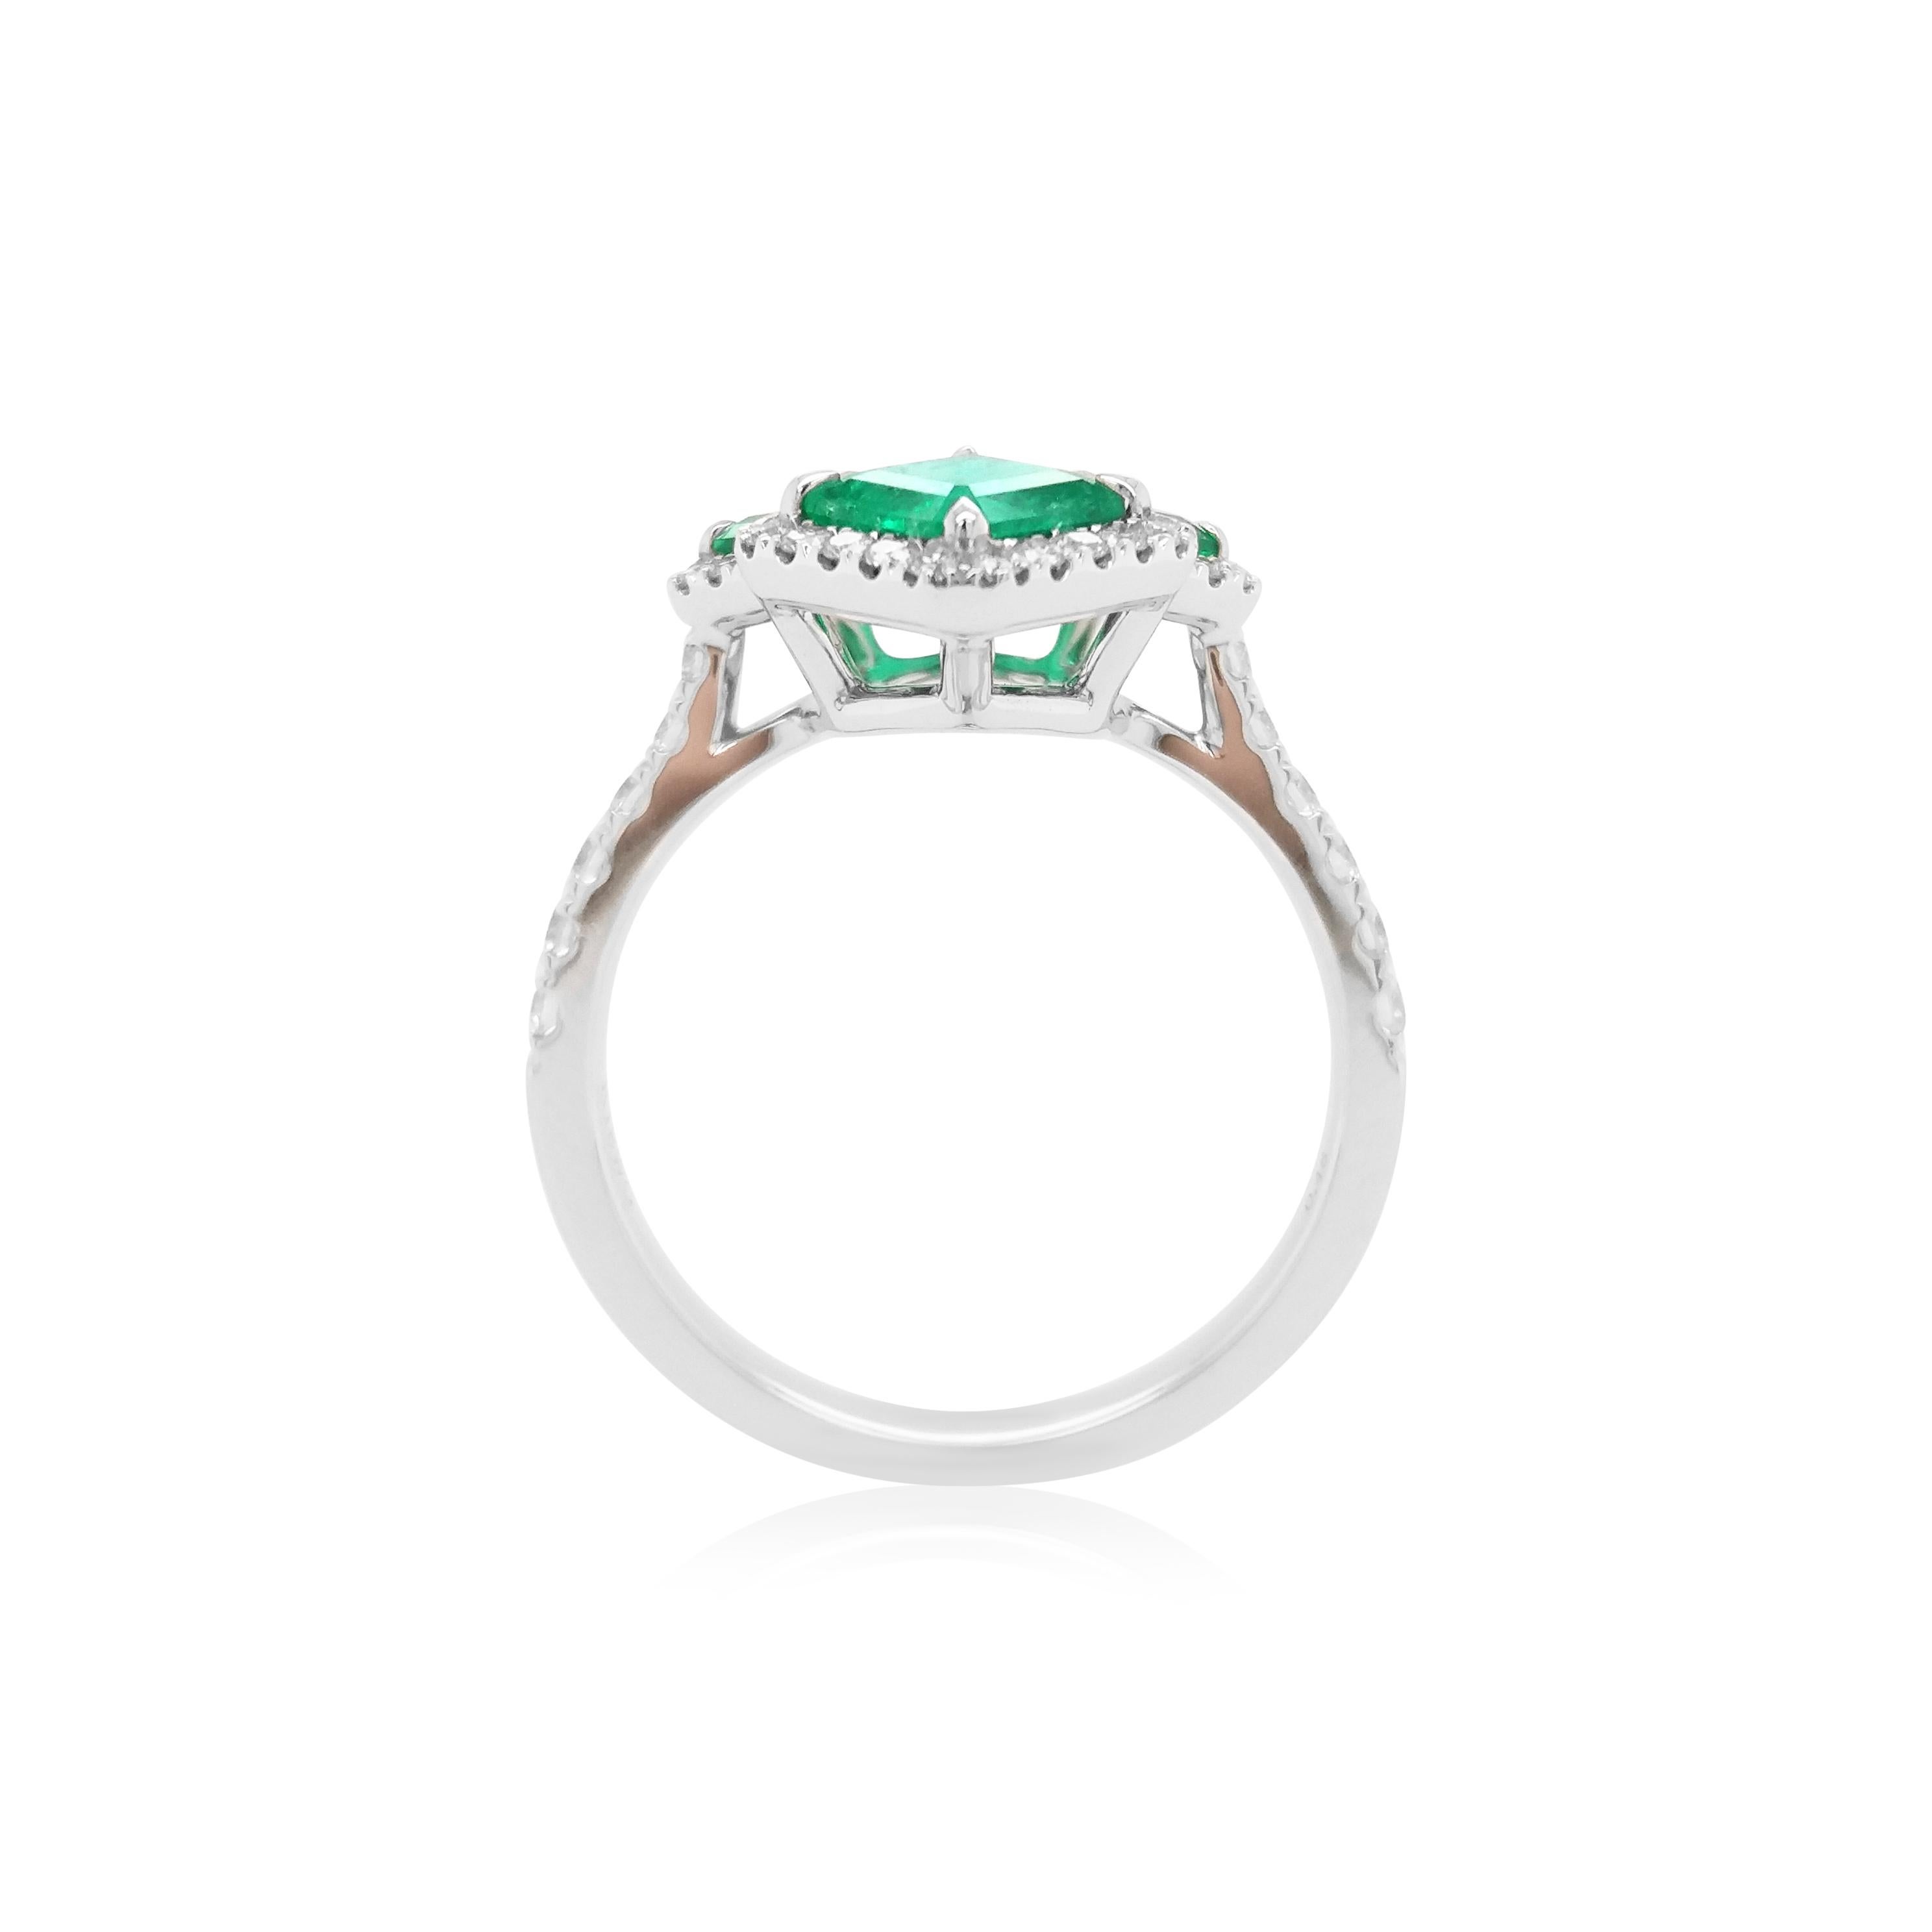 Contemporary Certified Colombian Emerald White Diamond 18K Gold Cocktail Ring